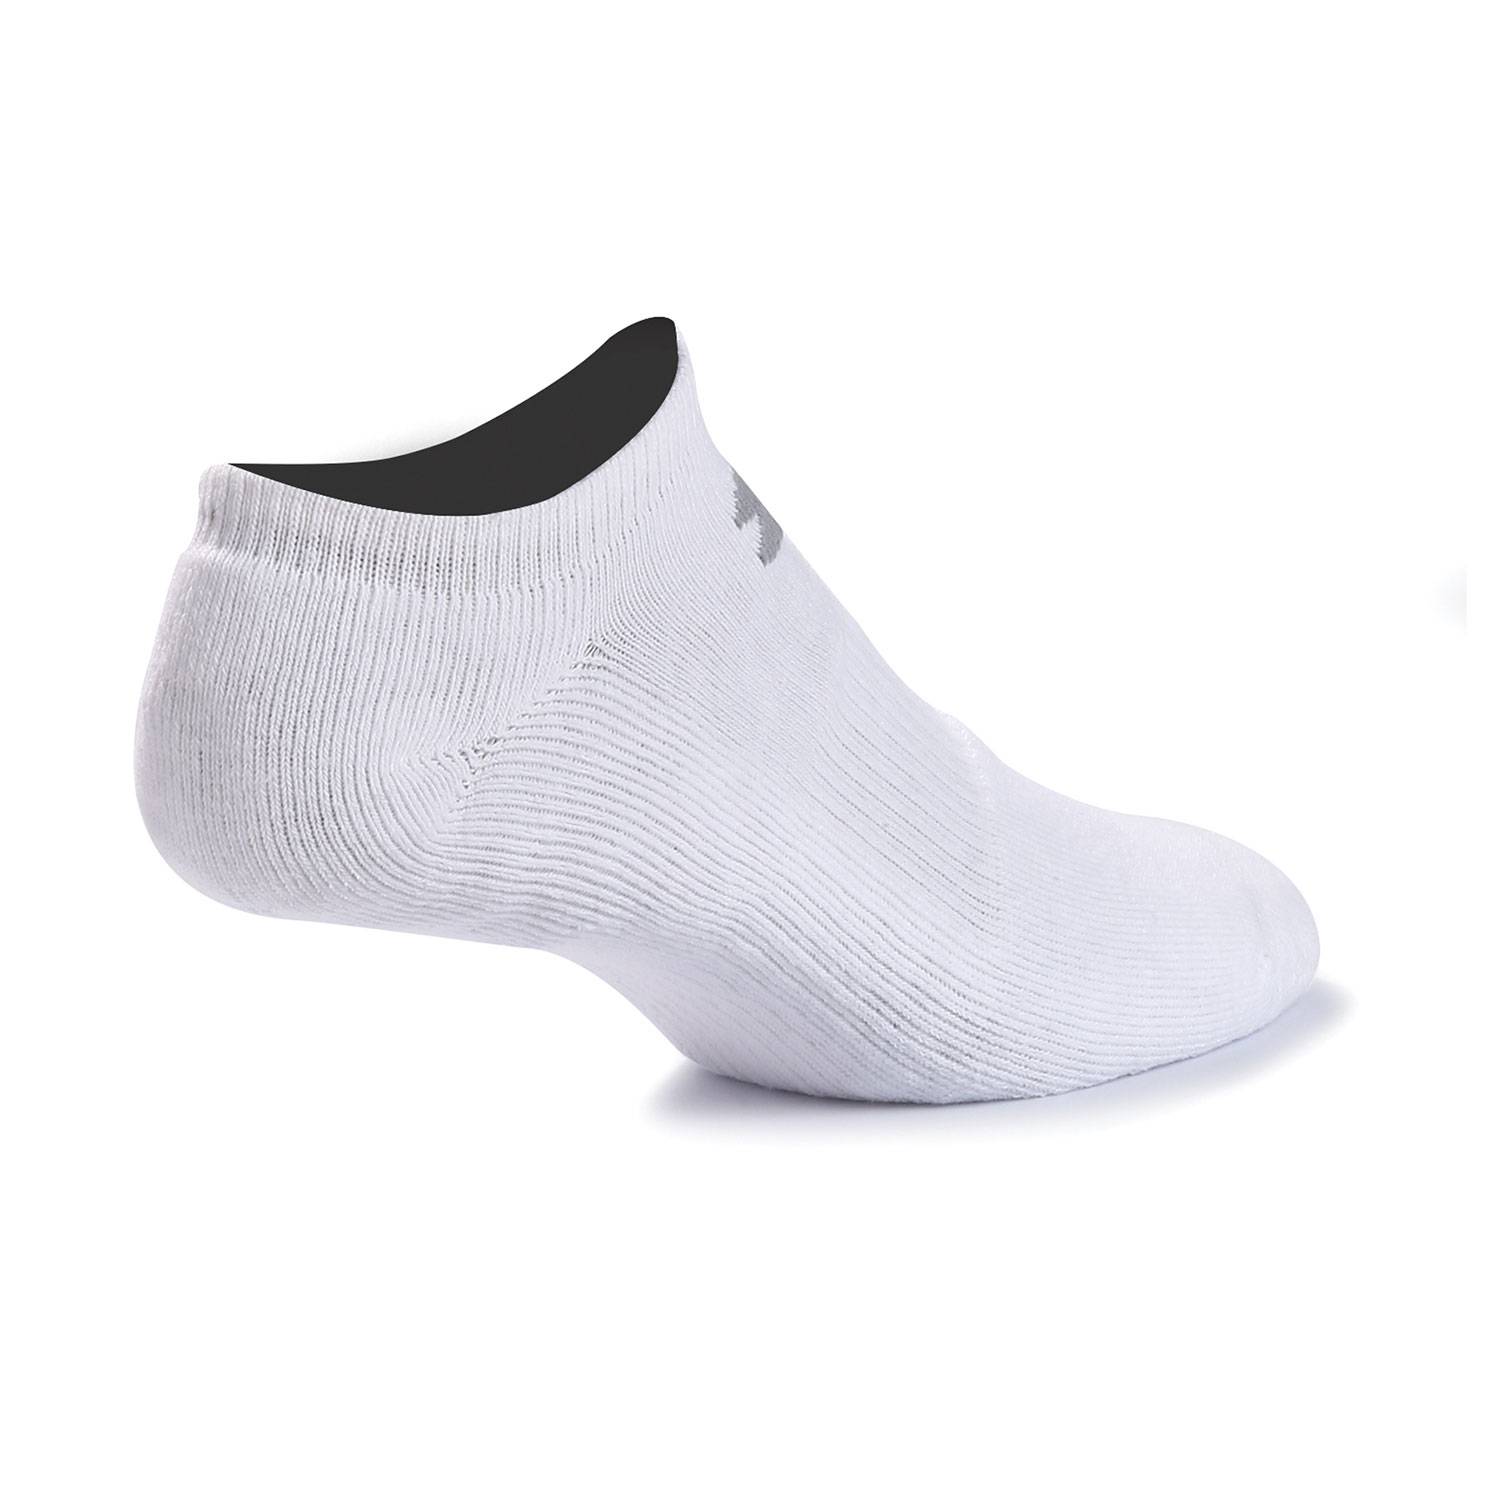 Under Armour Charged Cotton 2.0 No Show Sock 6 Pack